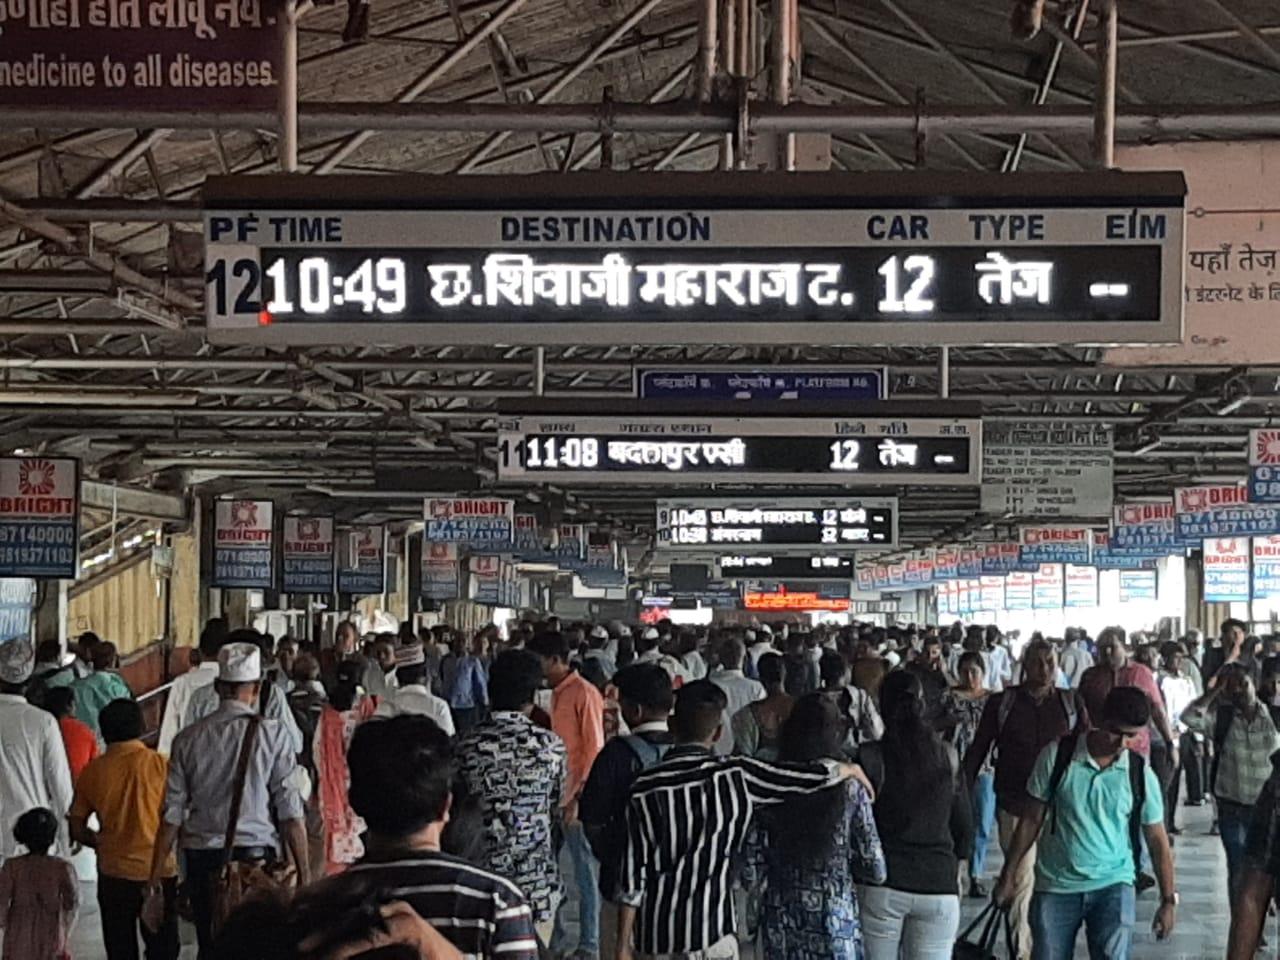 Western Railway currently has seven platforms numbered from west 1 to 7, while Central Railway also has seven platforms, numbered from 1 to 7